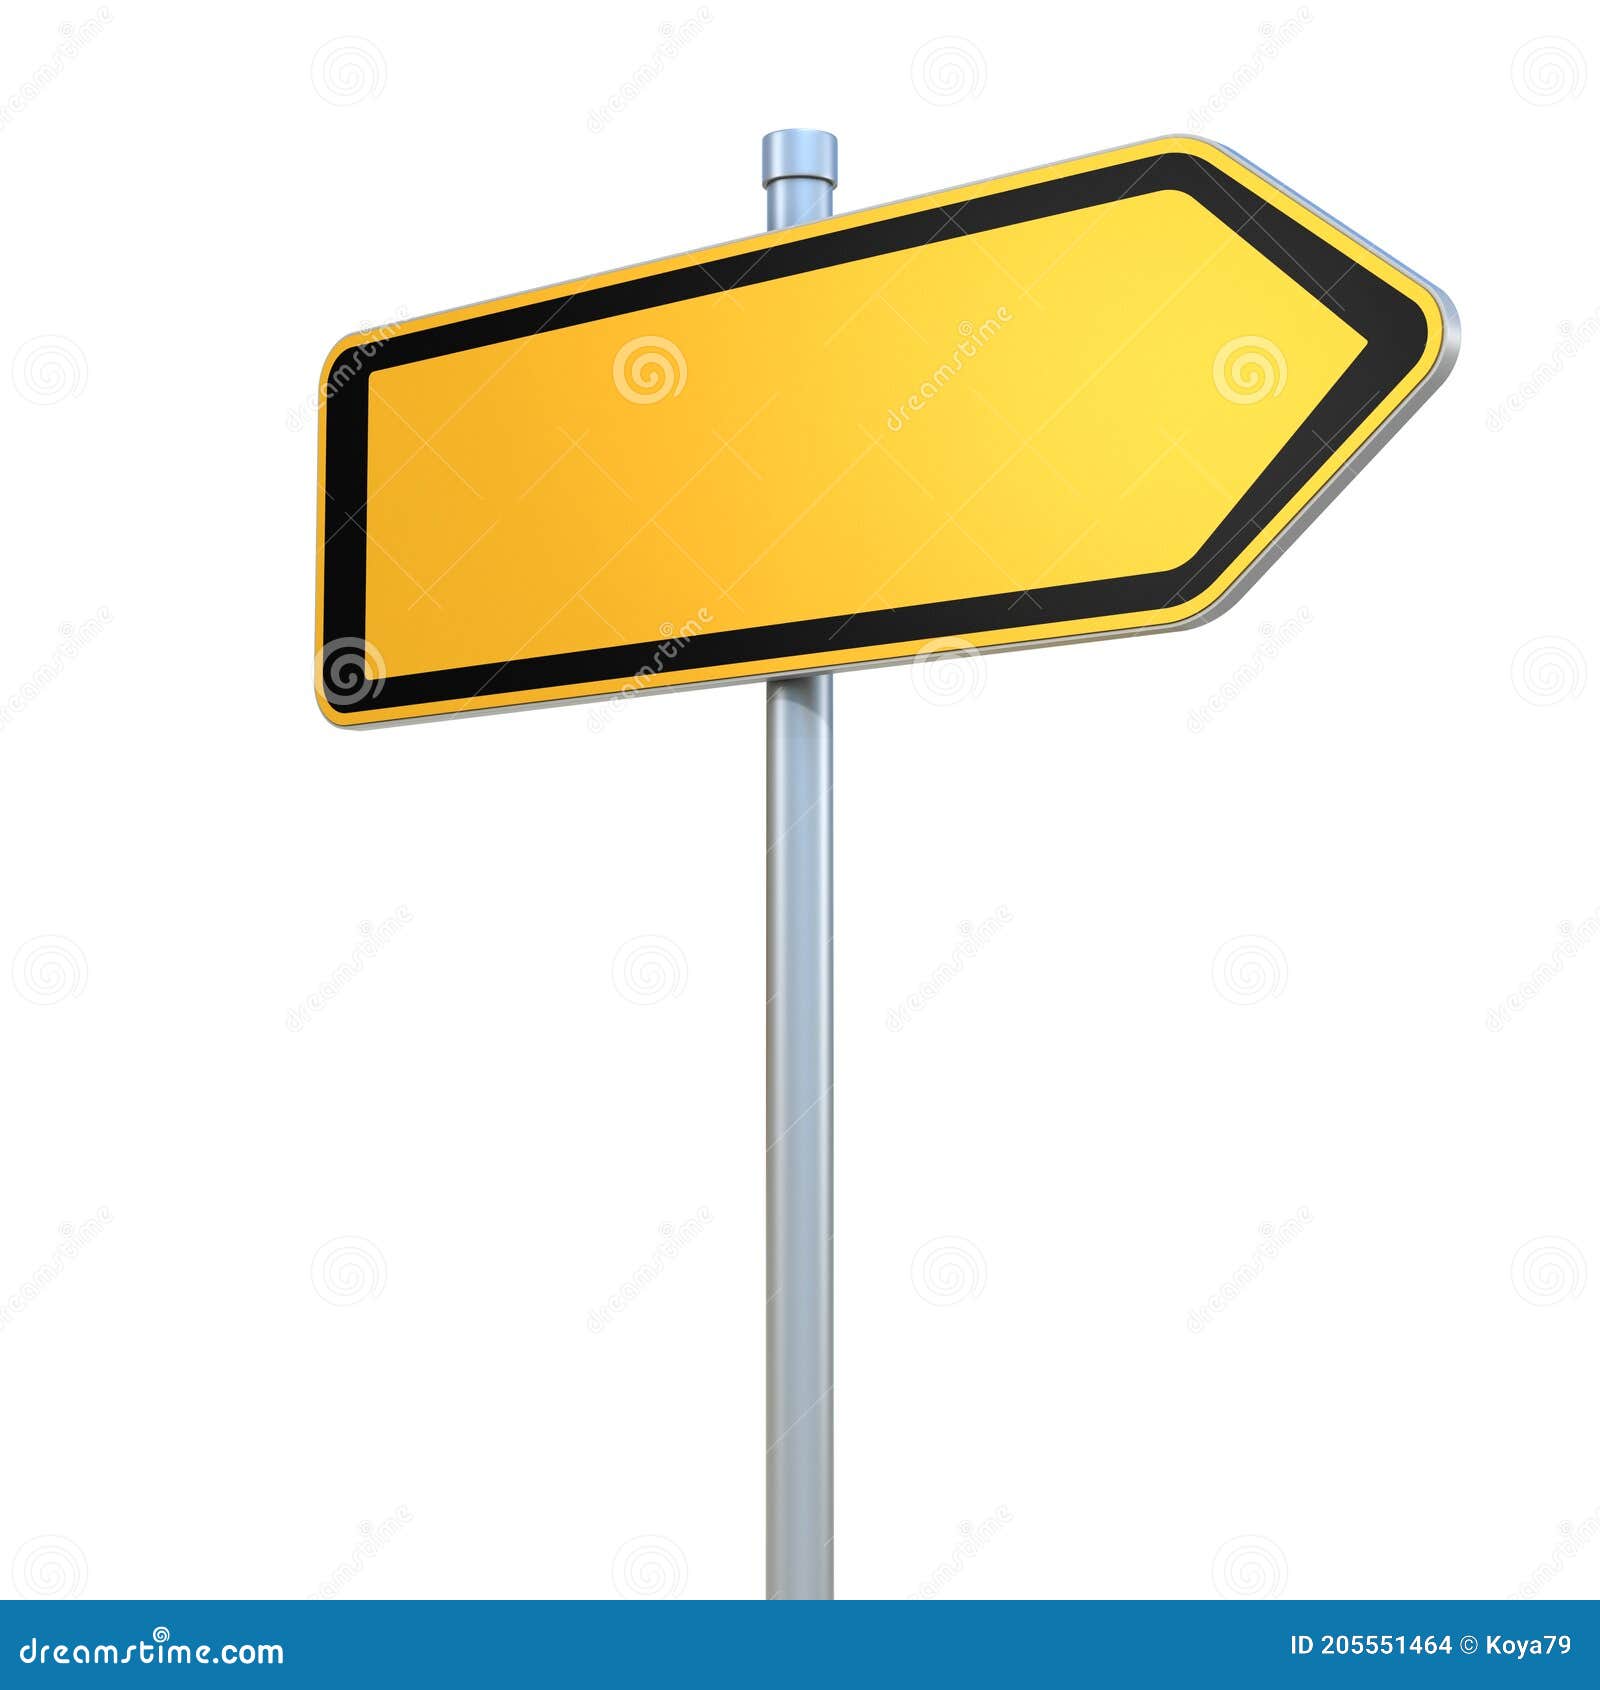 blank road sign templates